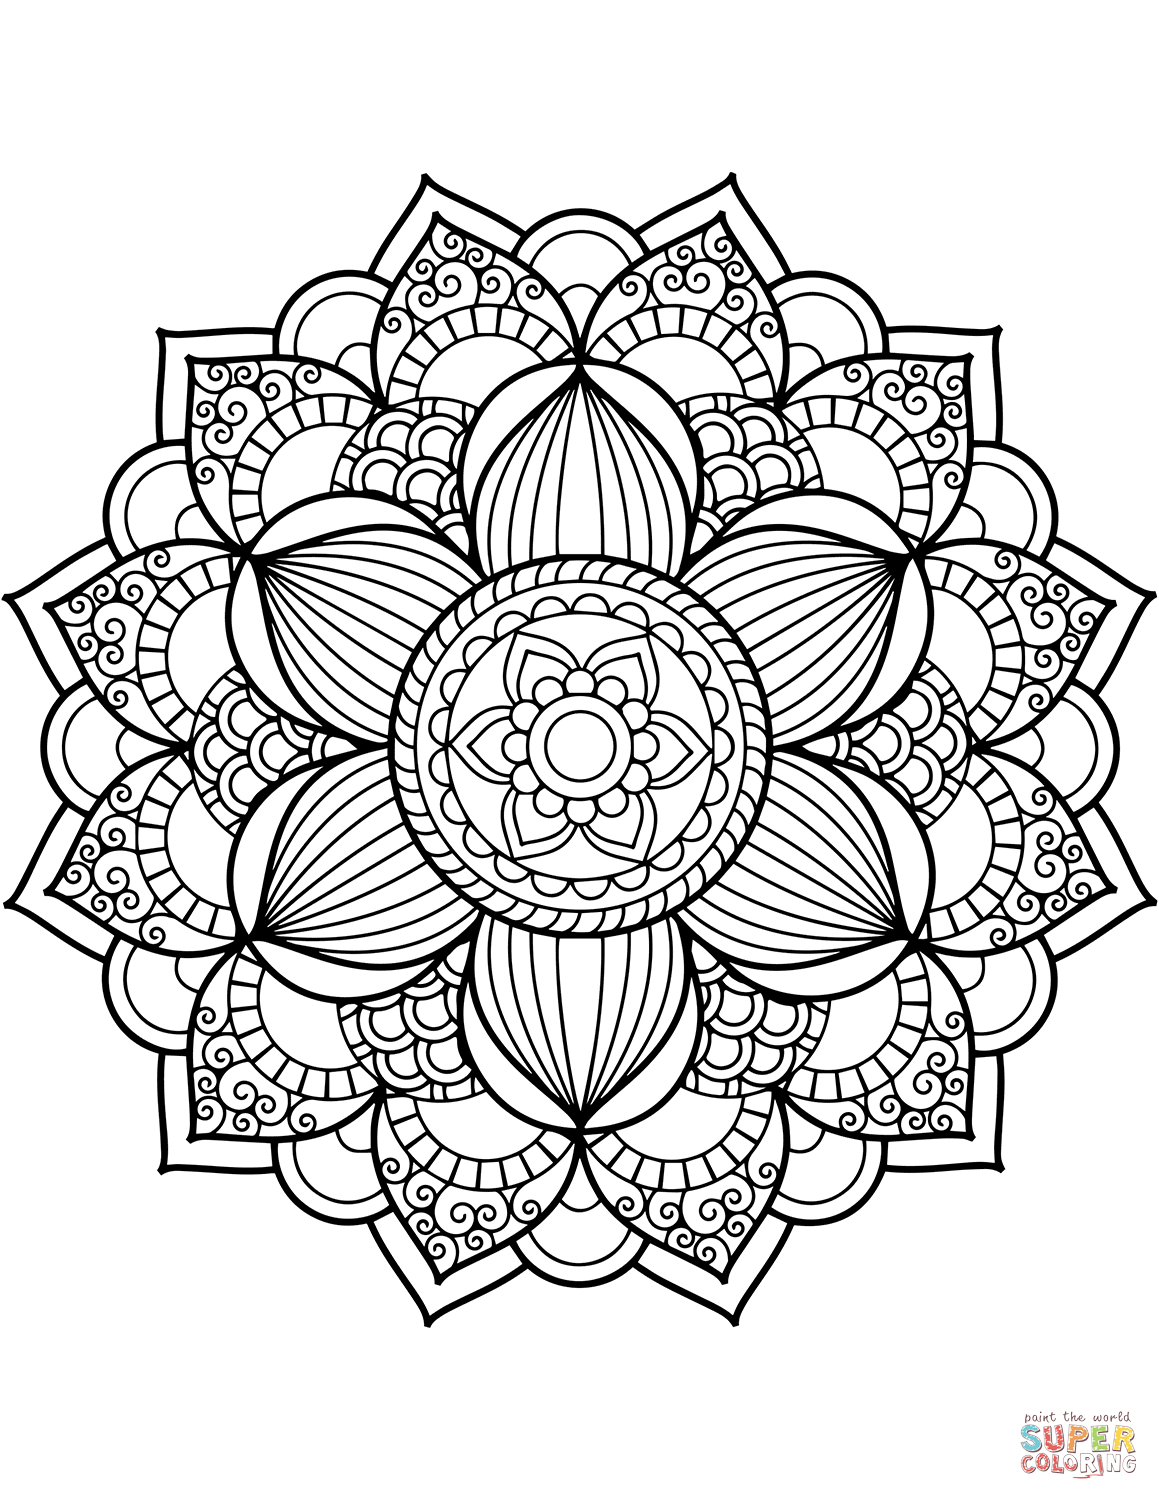 Mandala Coloring Pages For Adults Coloring Coloring Page Mandala Yin Yang Pages For Adults Picture